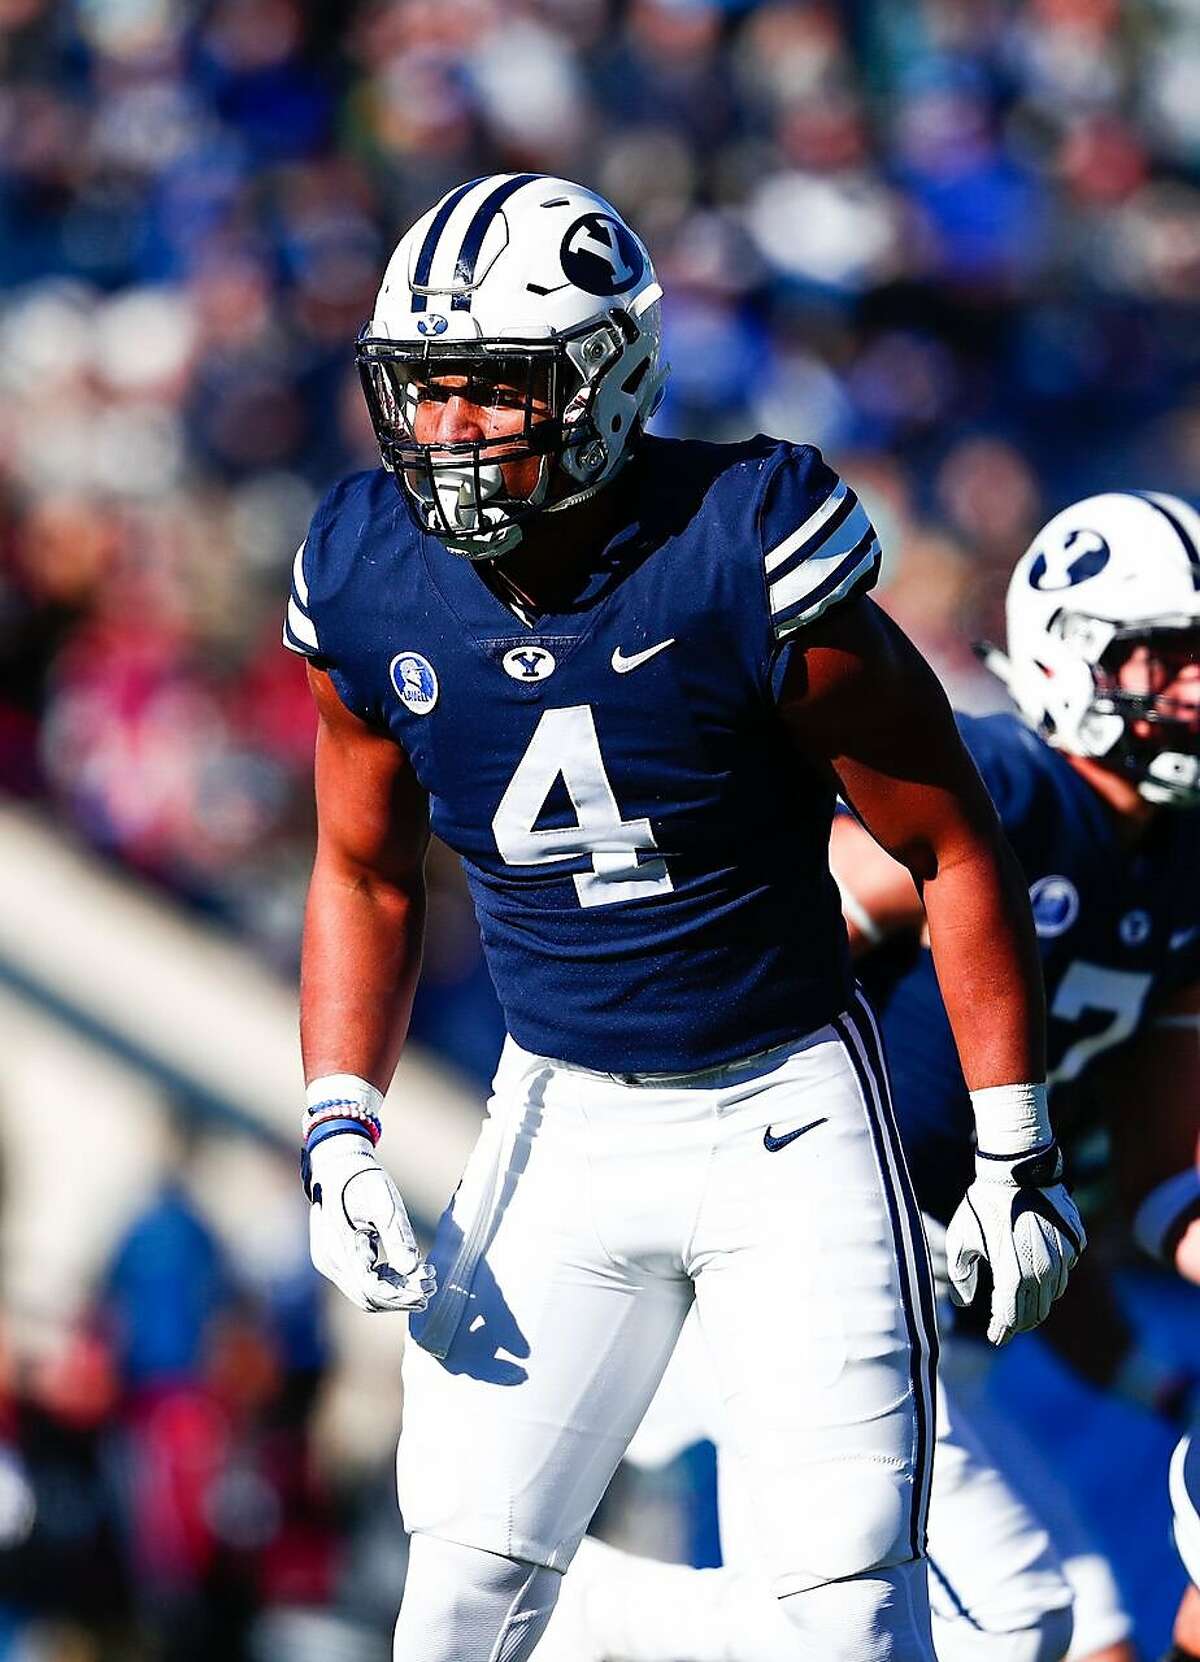 The 49ers selected Fred Warner, a linebacker from BYU, with the sixth pick of the third round in the NFL draft.